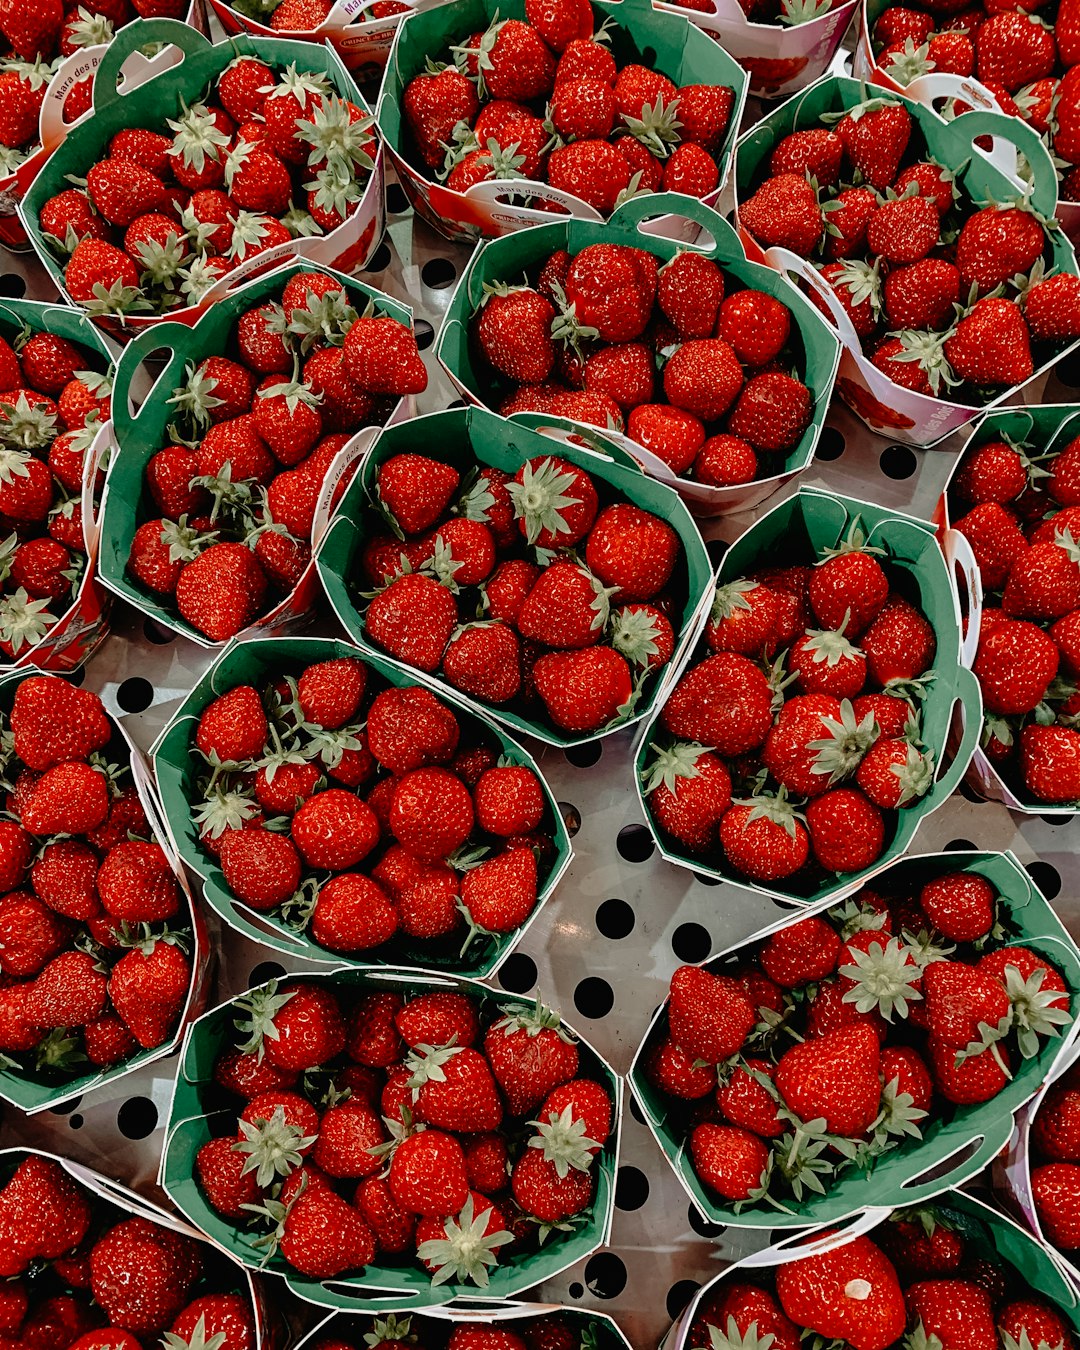 how many servings of fruit you should be eating each day - strawberries